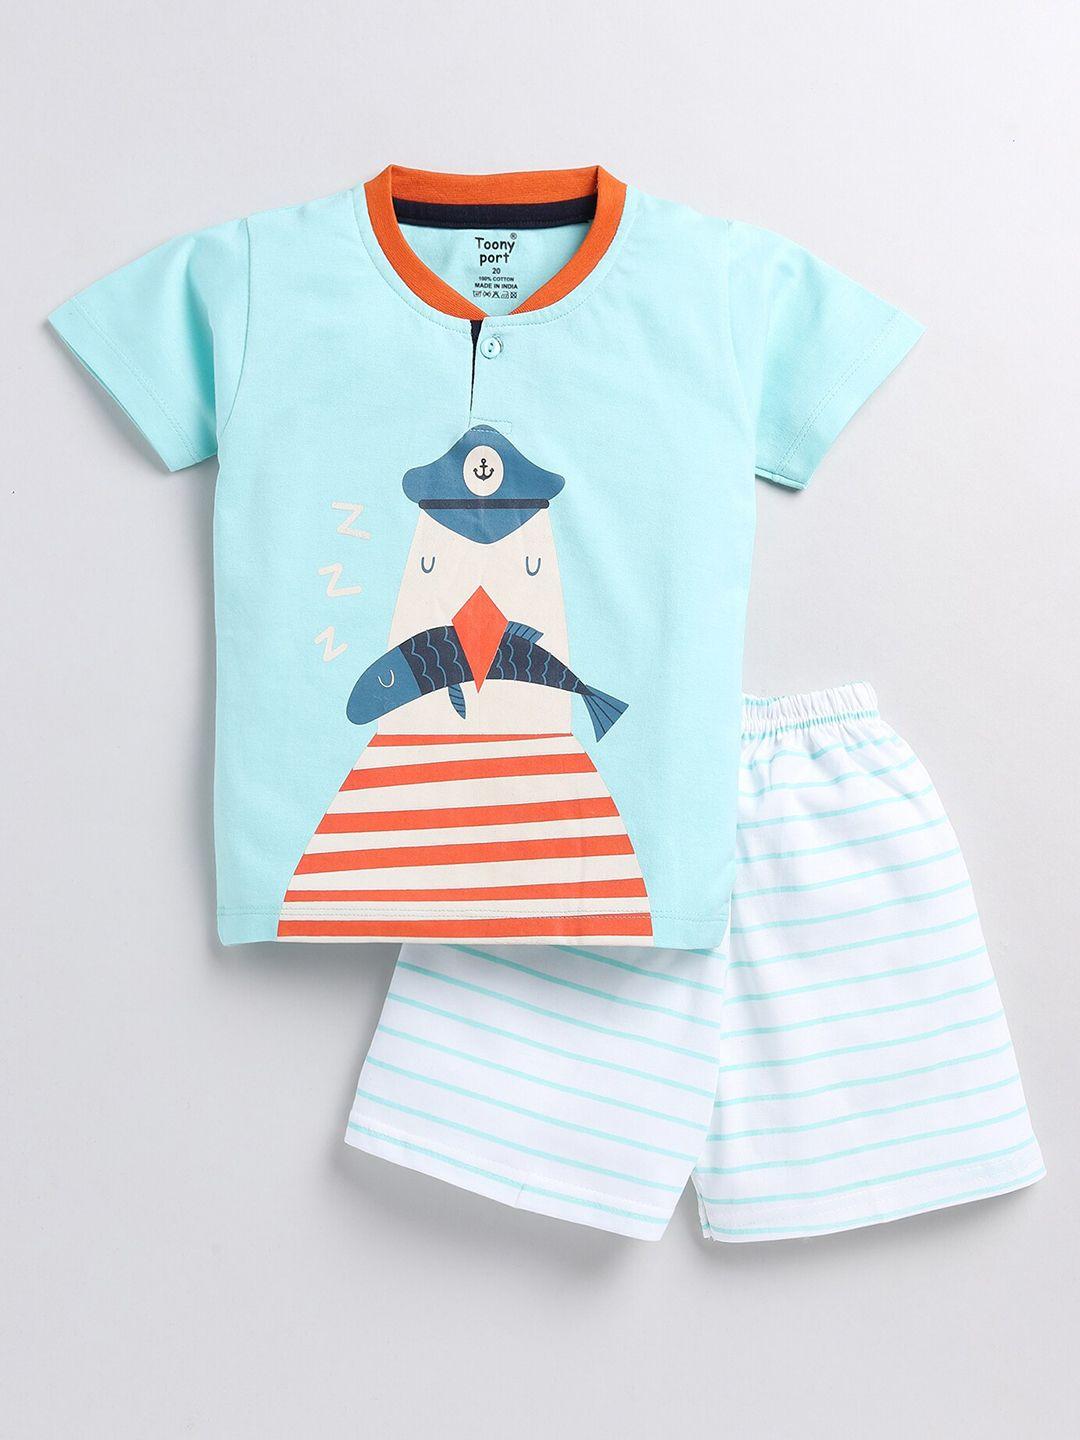 toonyport-boys-printed-pure-cotton-t-shirt-with-shorts-clothing-set